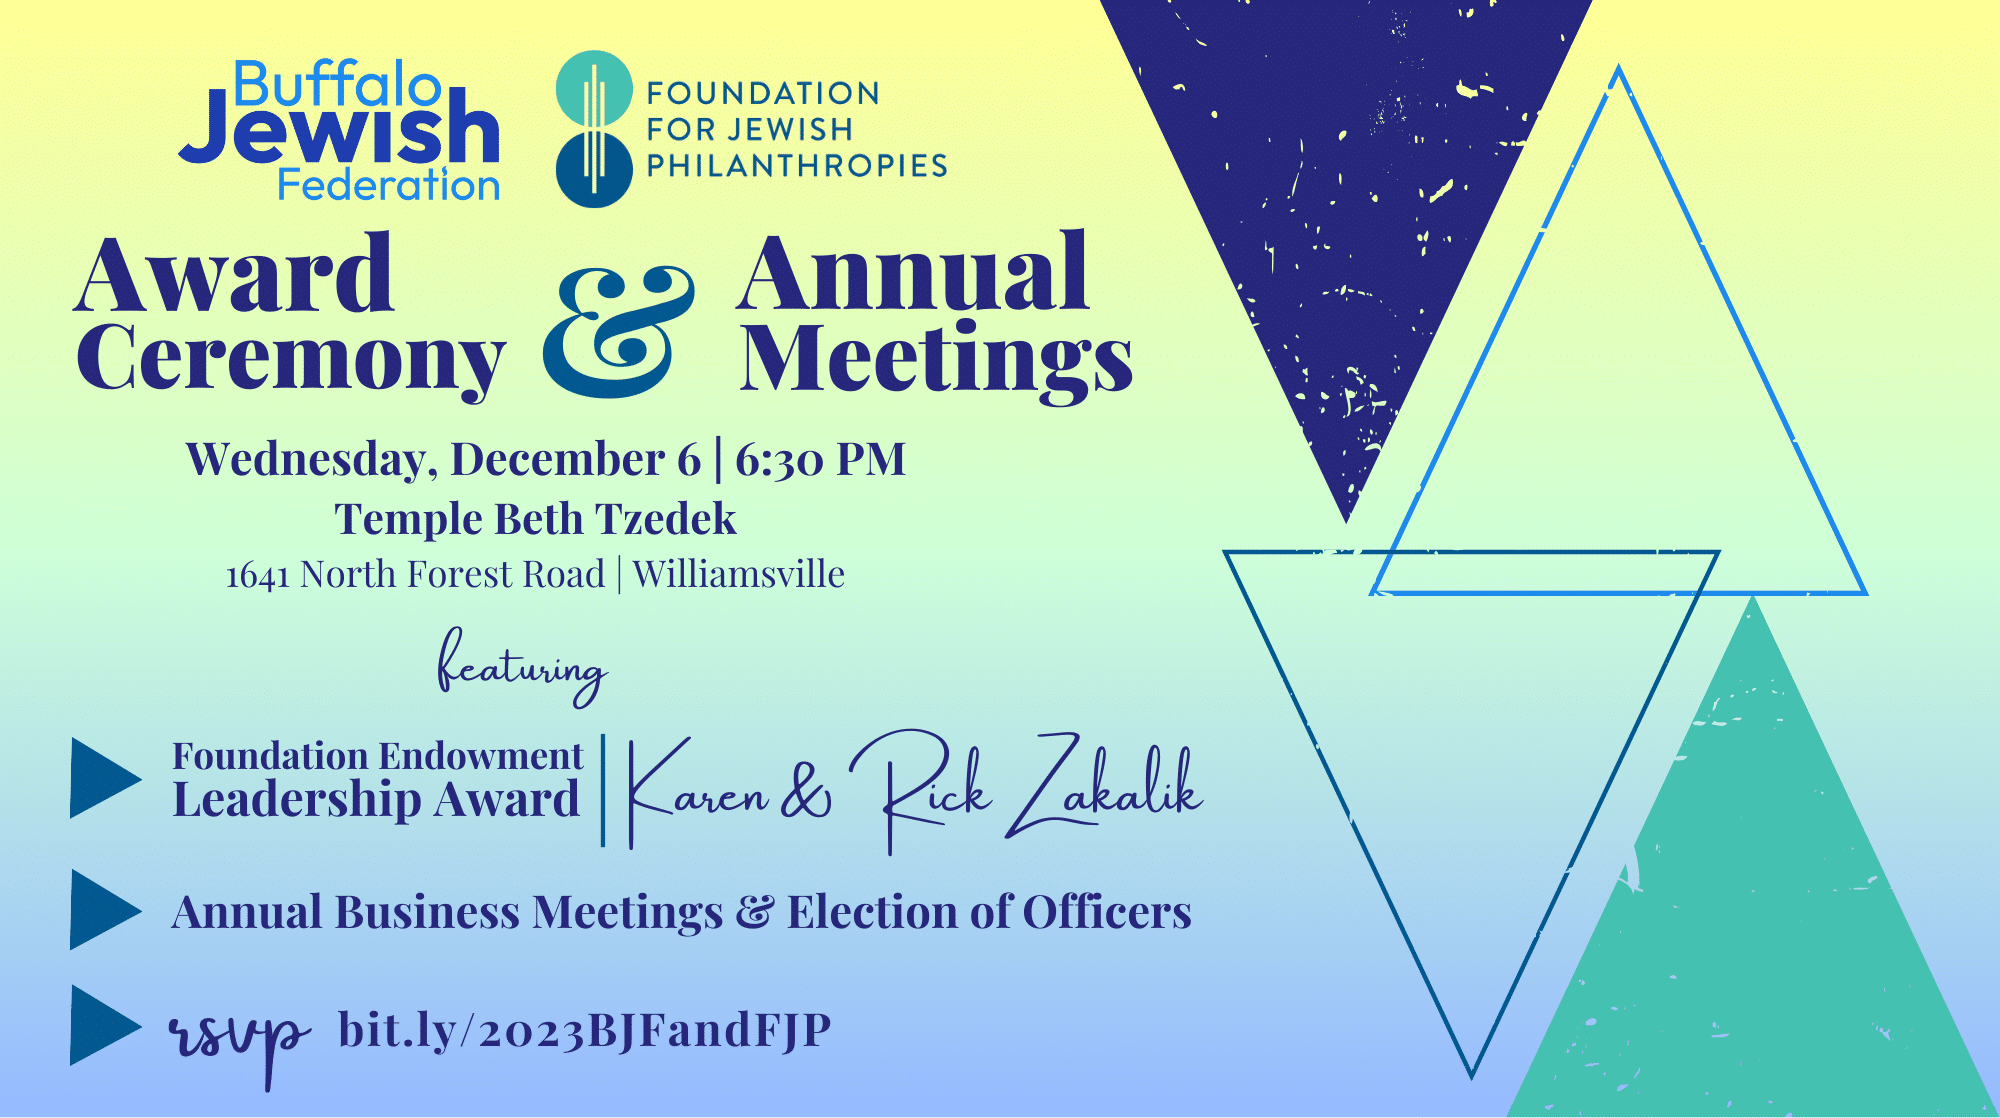 Federation & Foundation Joint Annual Meeting - annual meeting 2023 BJF FJP